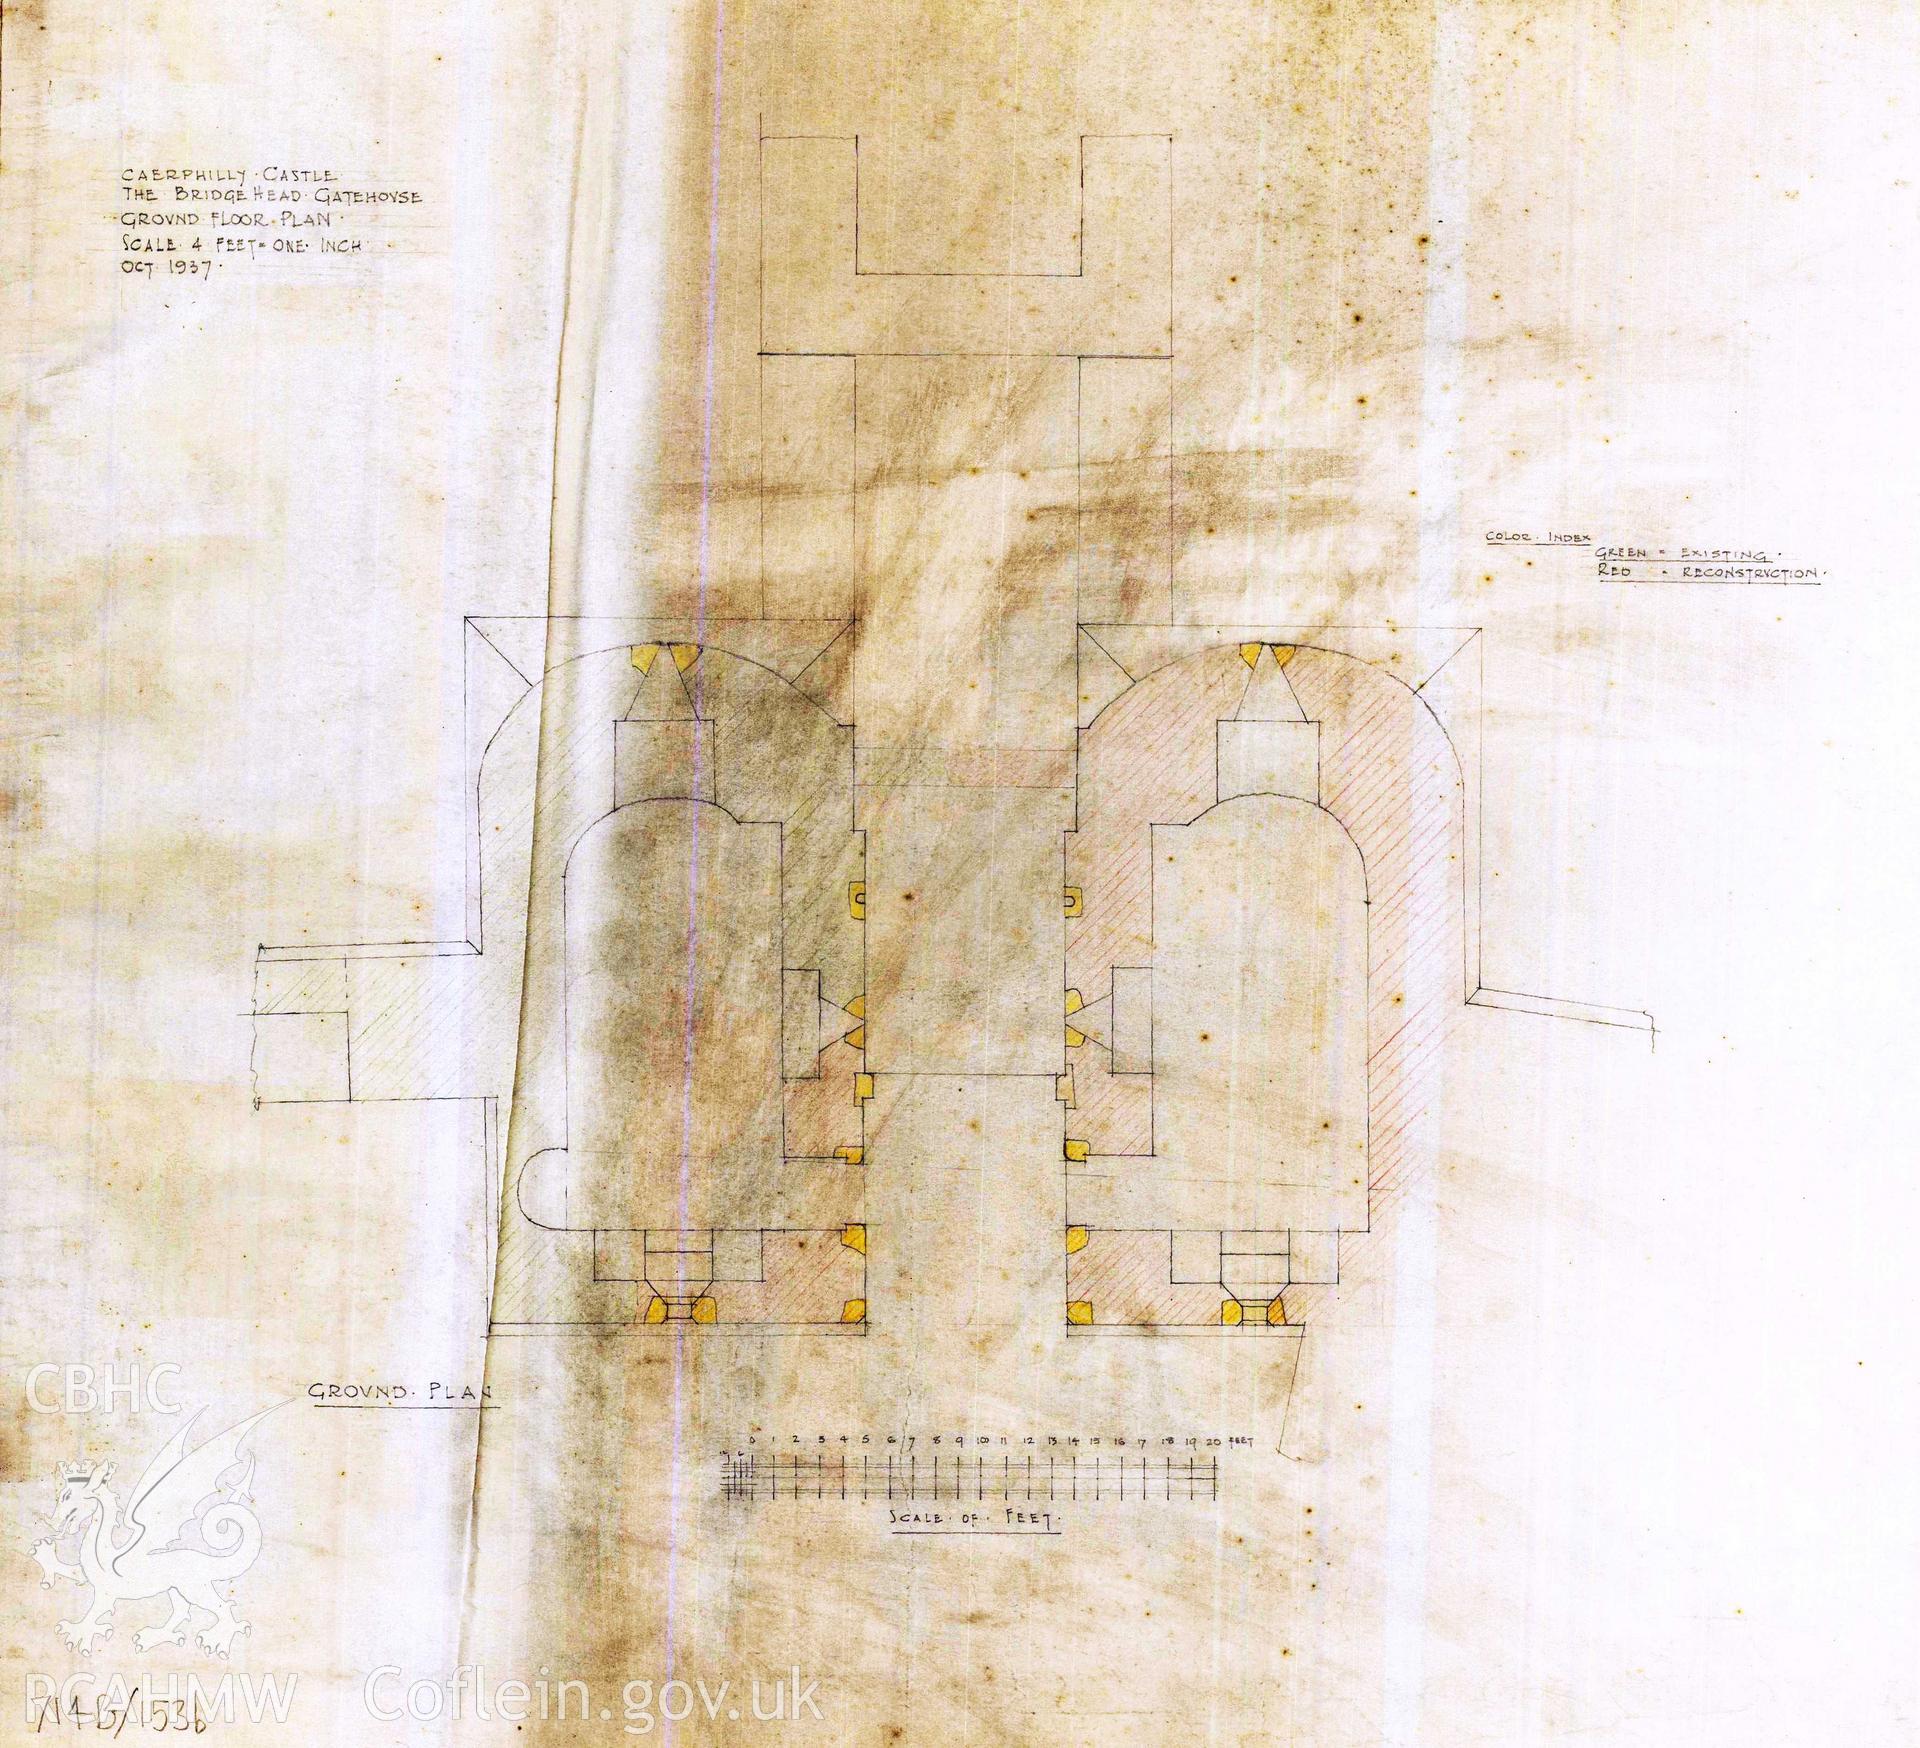 Cadw guardianship monument drawing of Caerphilly Castle. Dam, S gate, ground plan, recon. Cadw Ref. No:714B/153b. Scale 1:48.